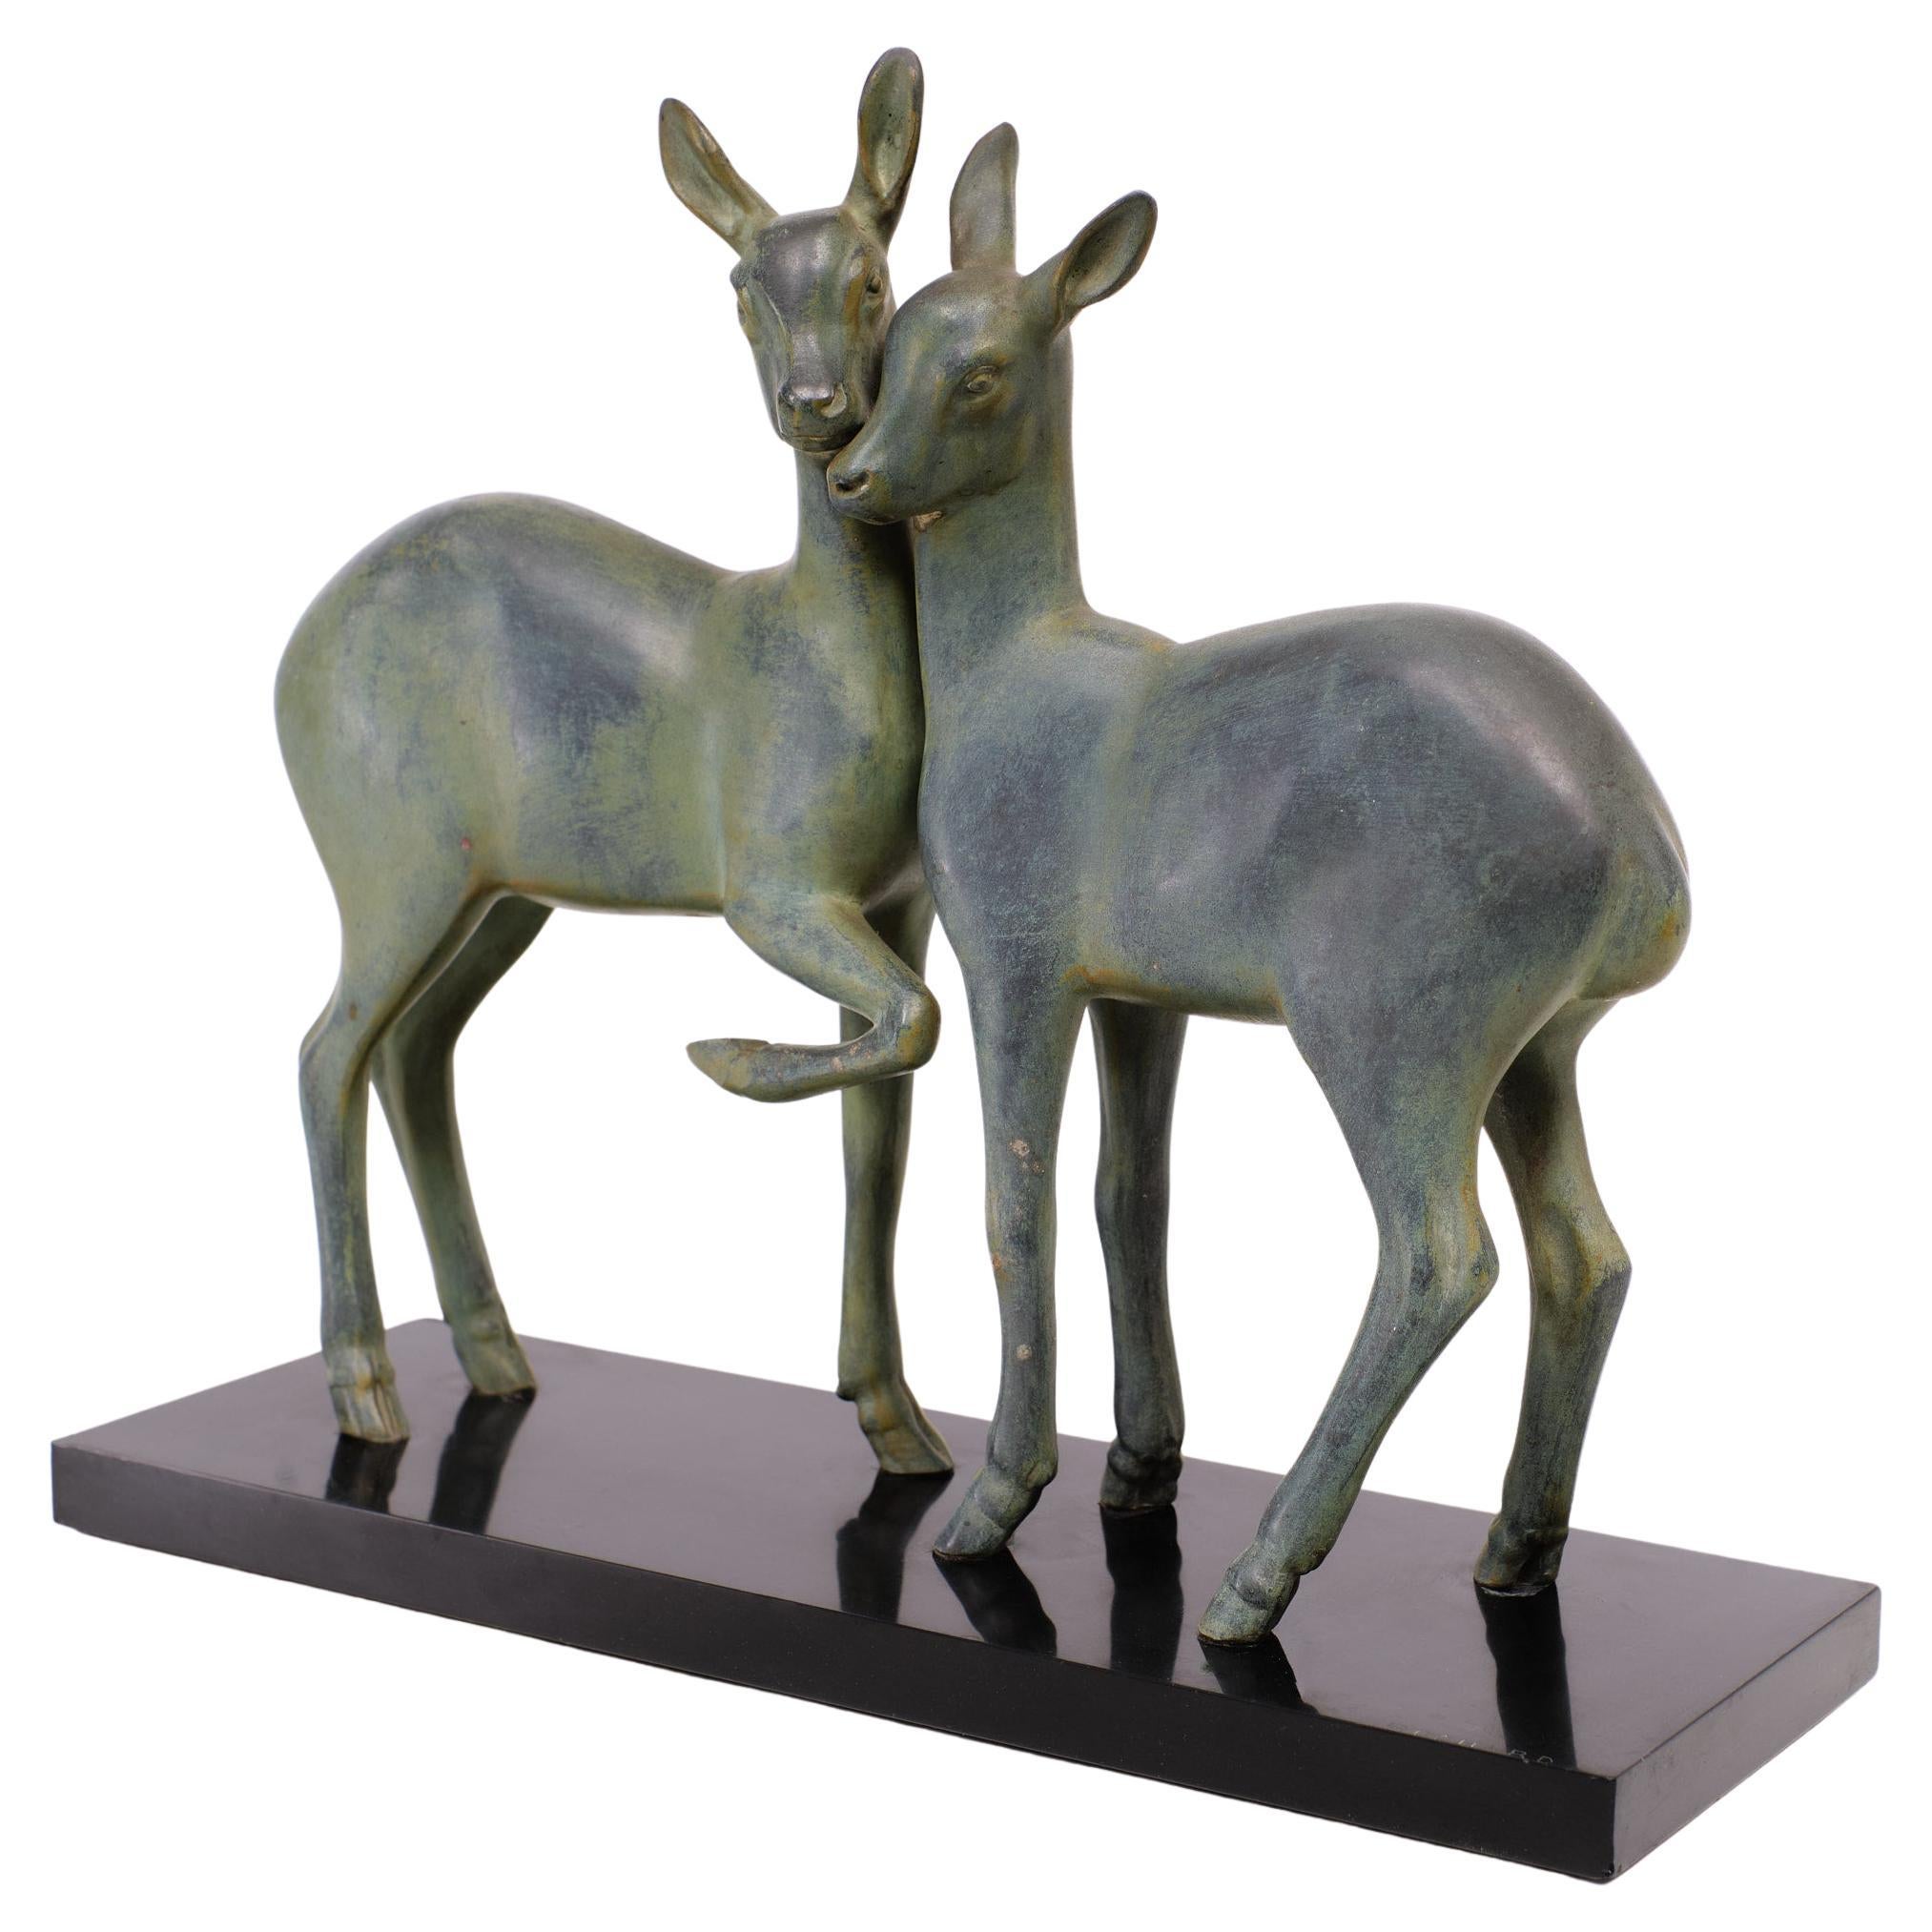 Lovely Bronze deer figurines. On a Black Marble base .signed. Beautiful Patine.
Irénée Rochard was a French decorative sculptor best known for his Art Nouveau-styled depictions of animals. Most often working in bronze, he also created several